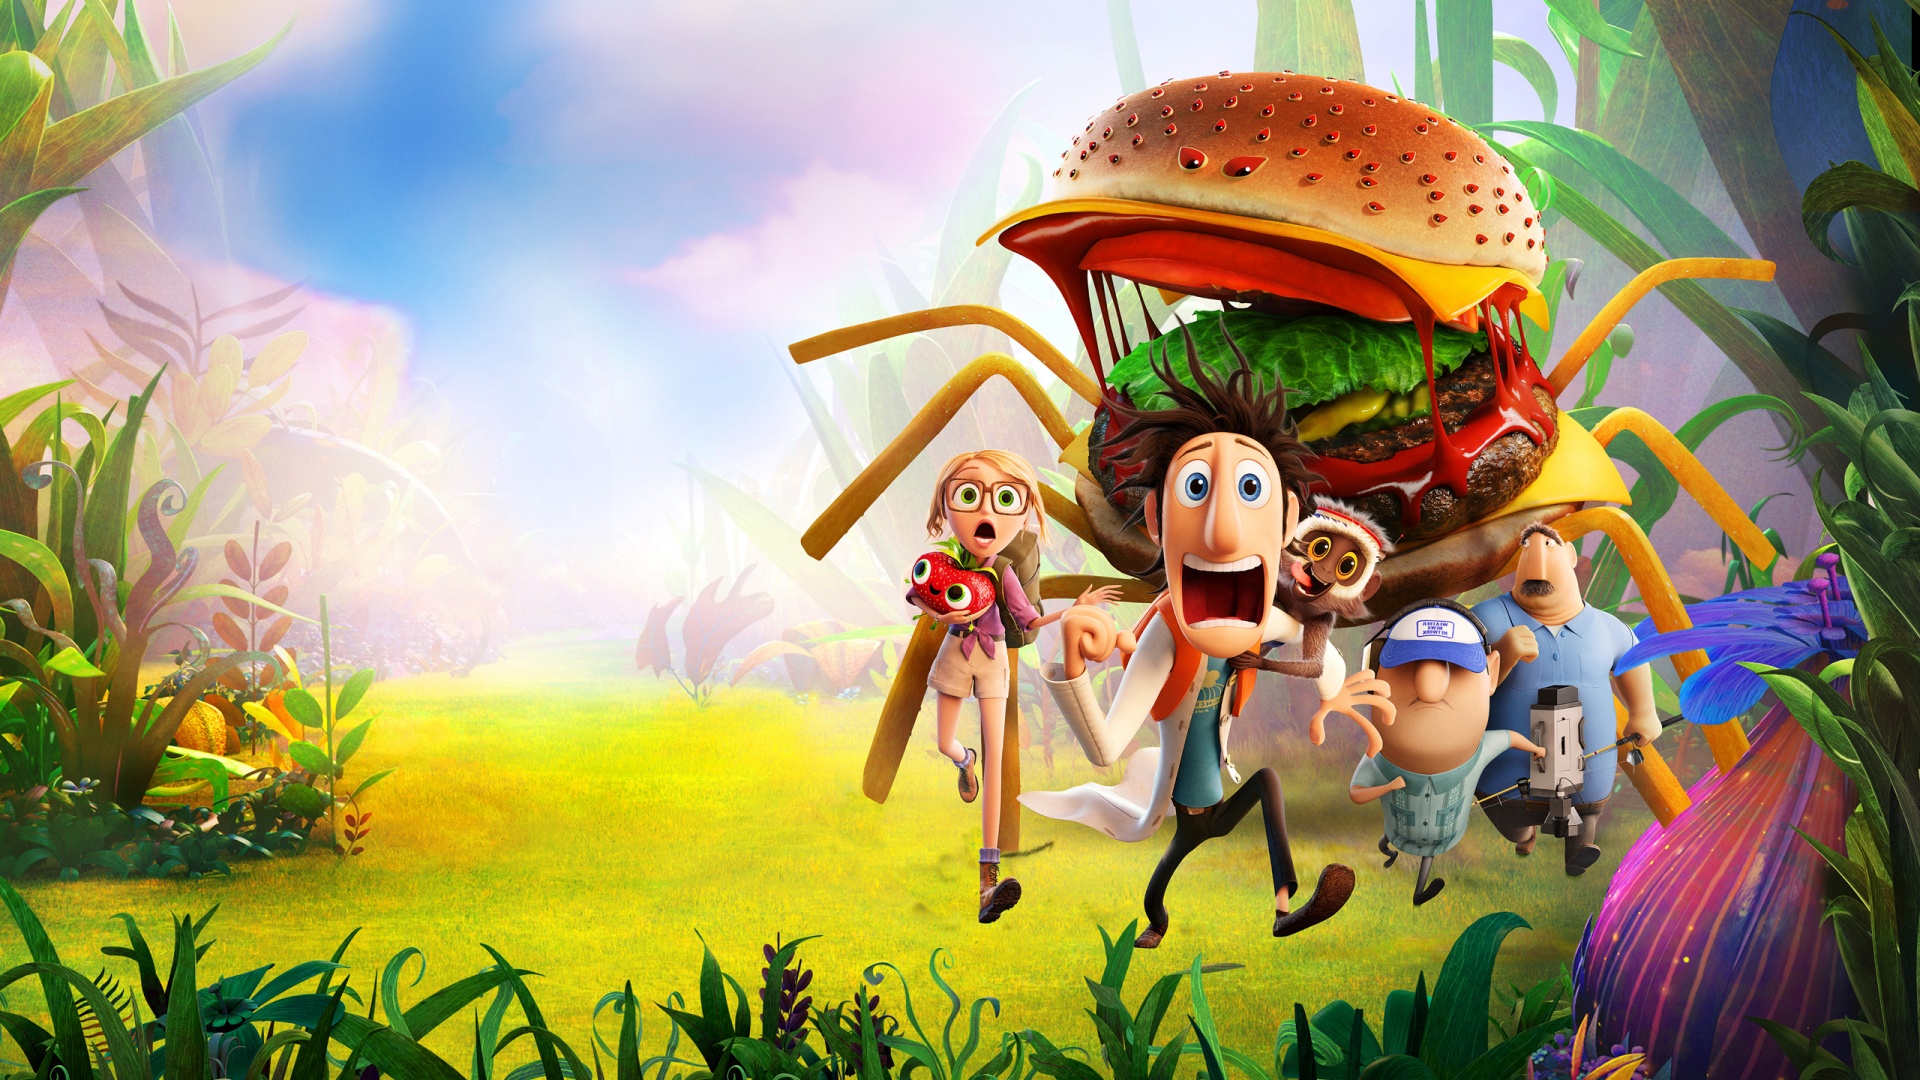 Cloudy with a Chance of Meatballs 2 Art